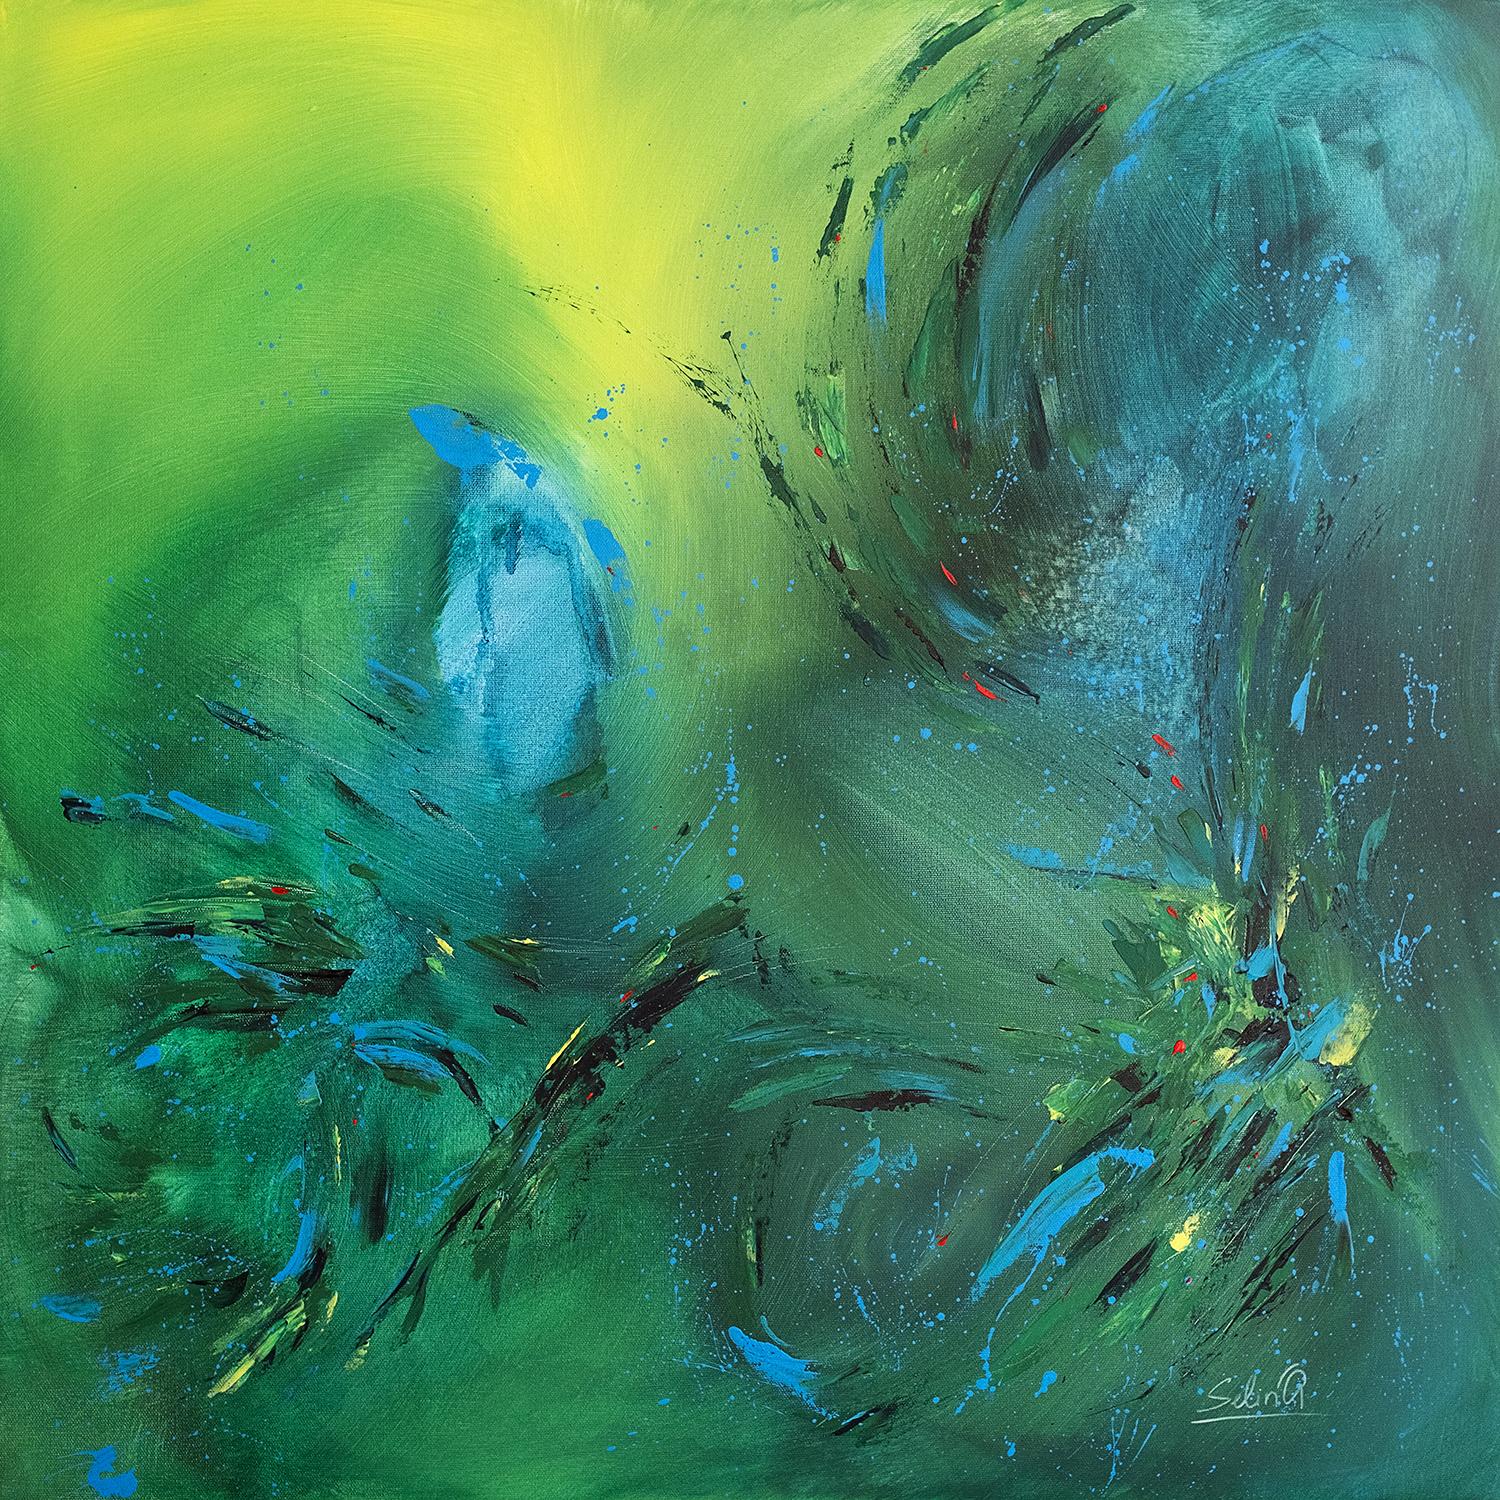 Mystery of New World, Modern Colorful Abstract Painting 100x100cm by Anna Selina